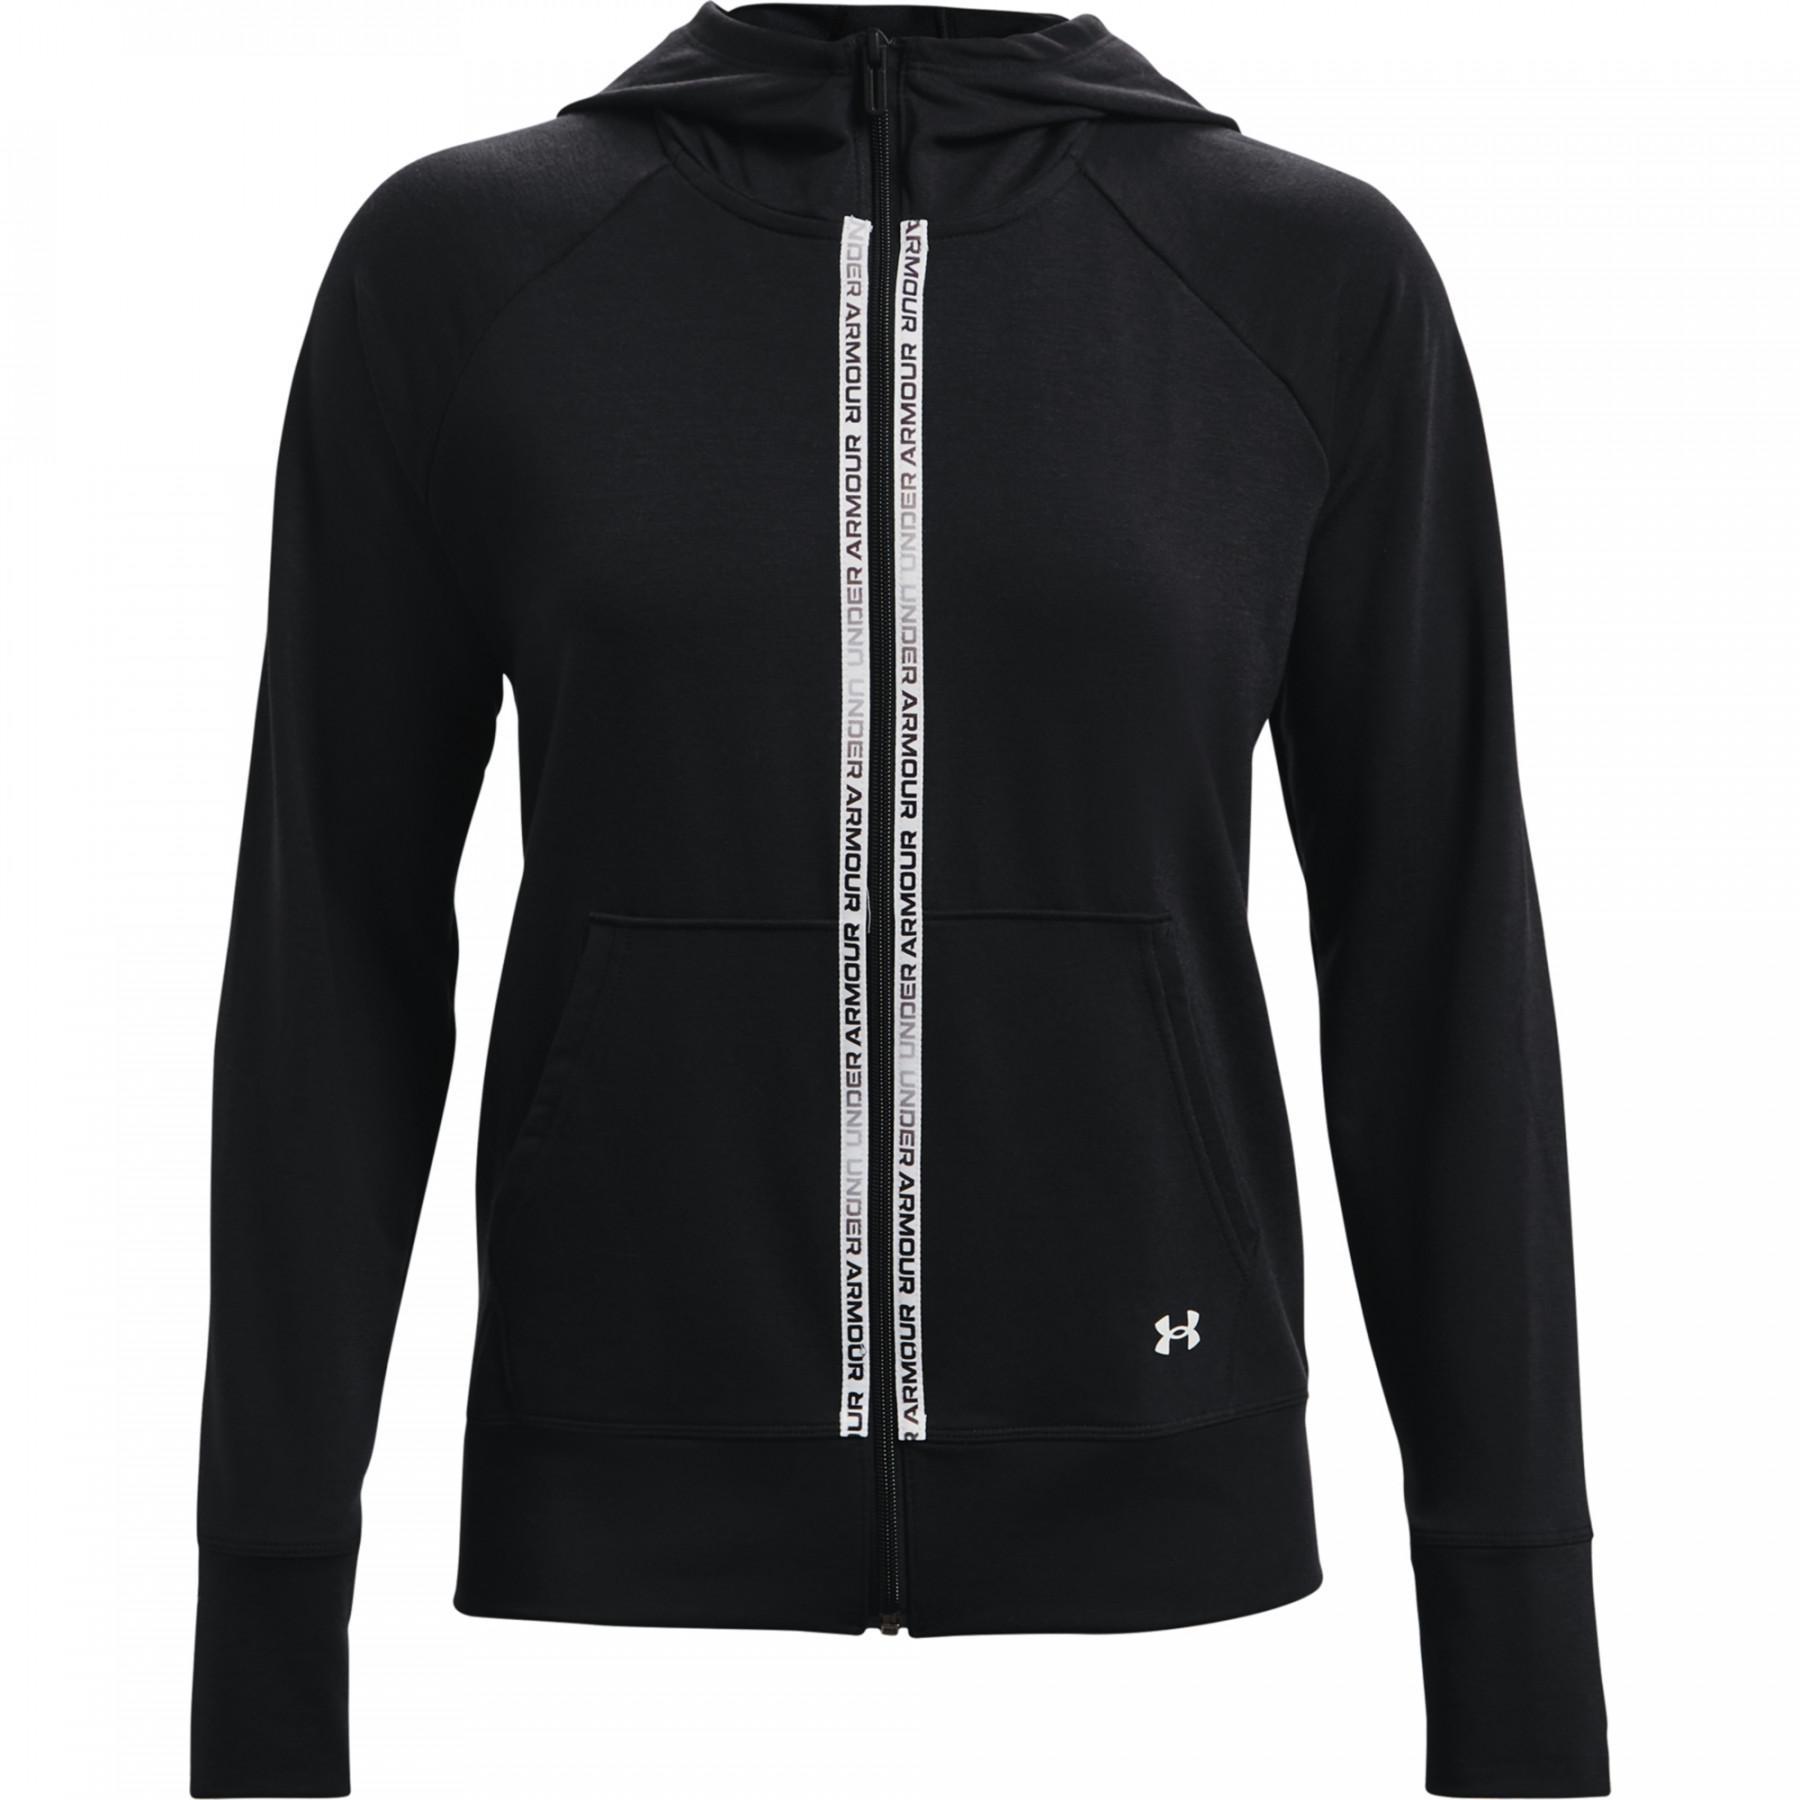 Capuz completo para mulheres Under Armour Rival Terry